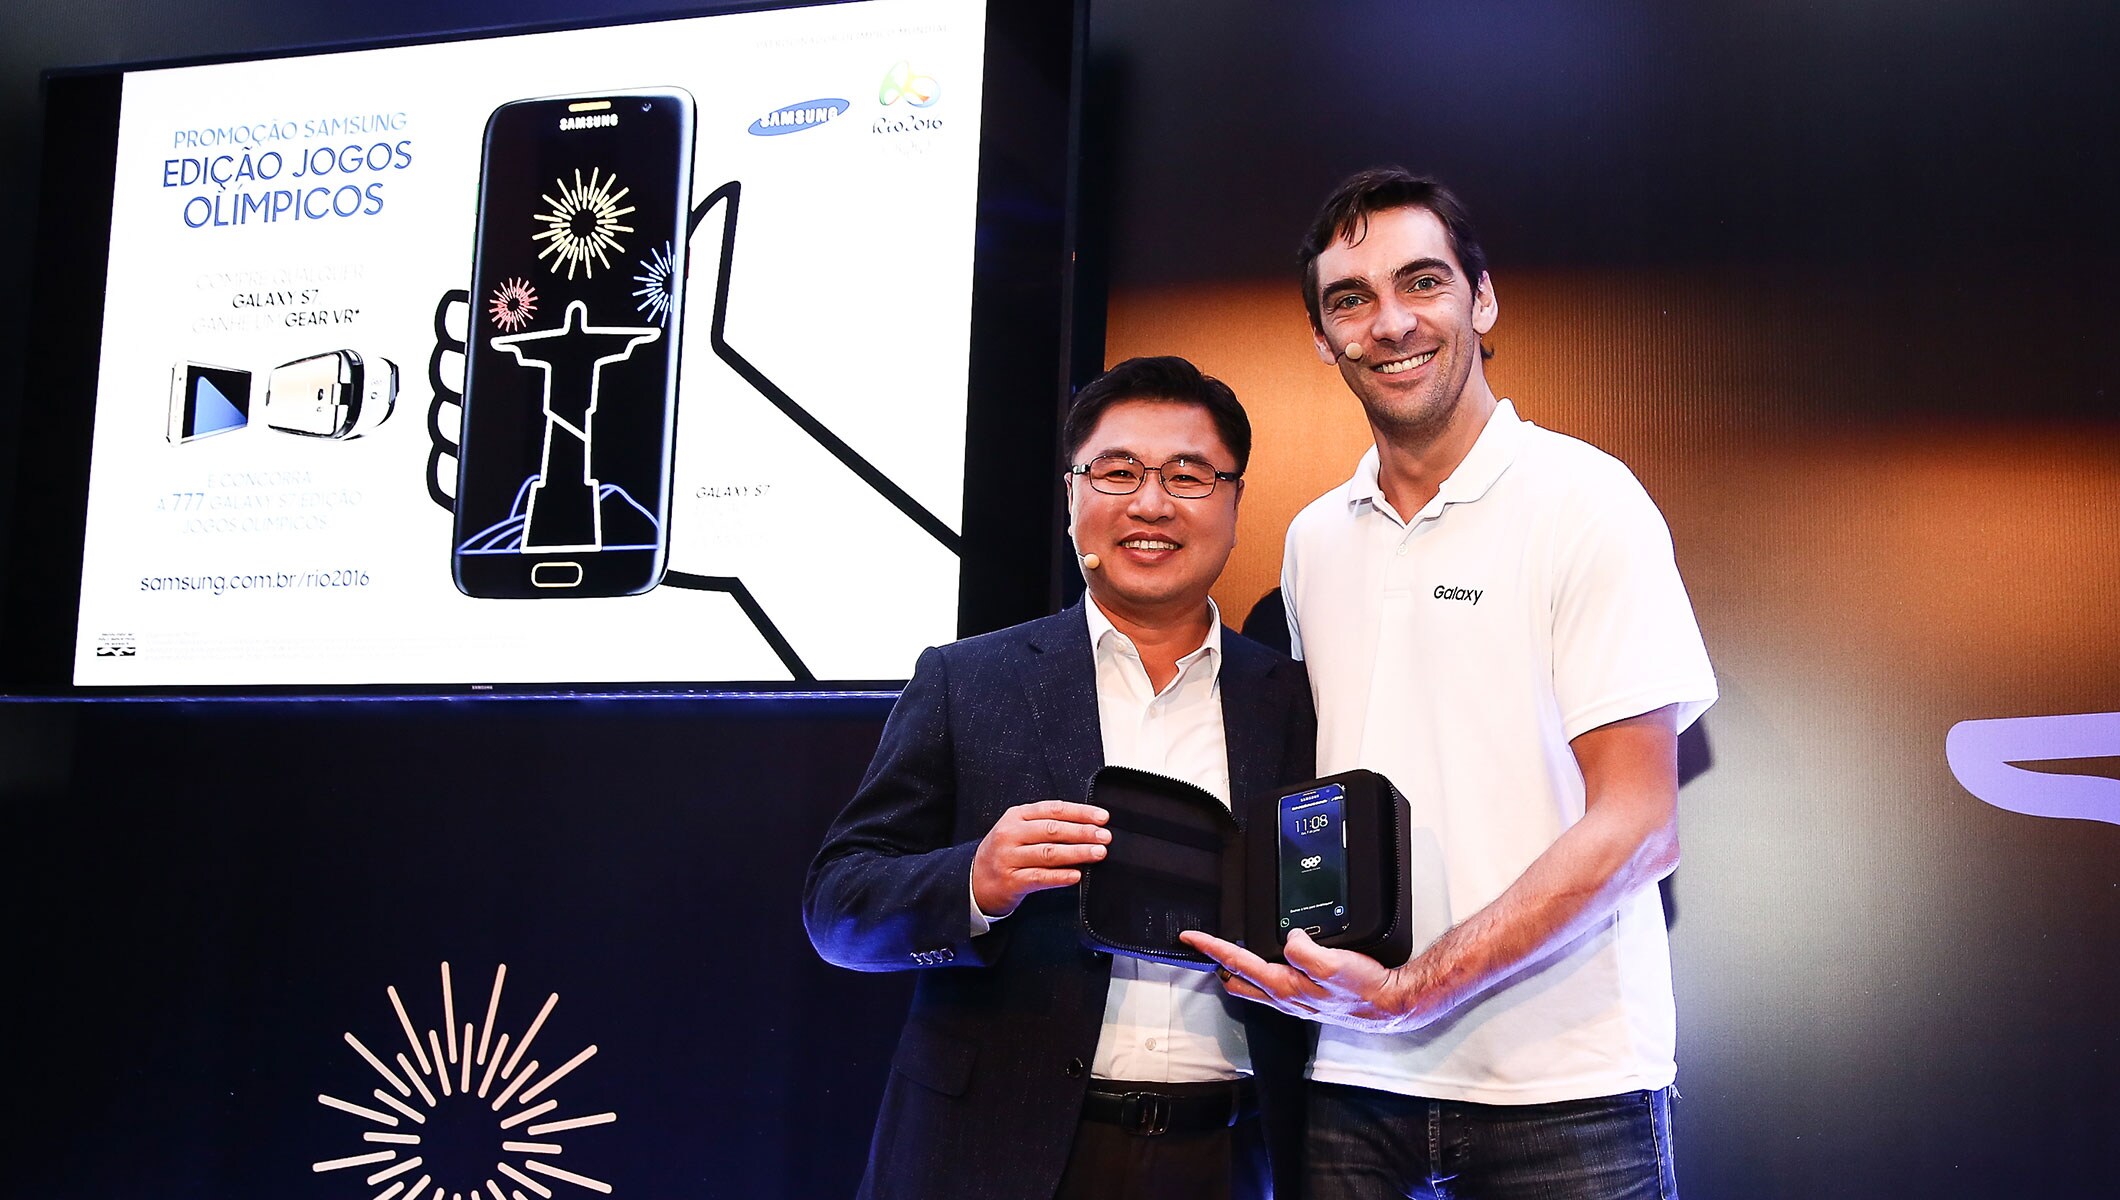 IOC and Worldwide TOP Partner Samsung to help Rio athletes stay